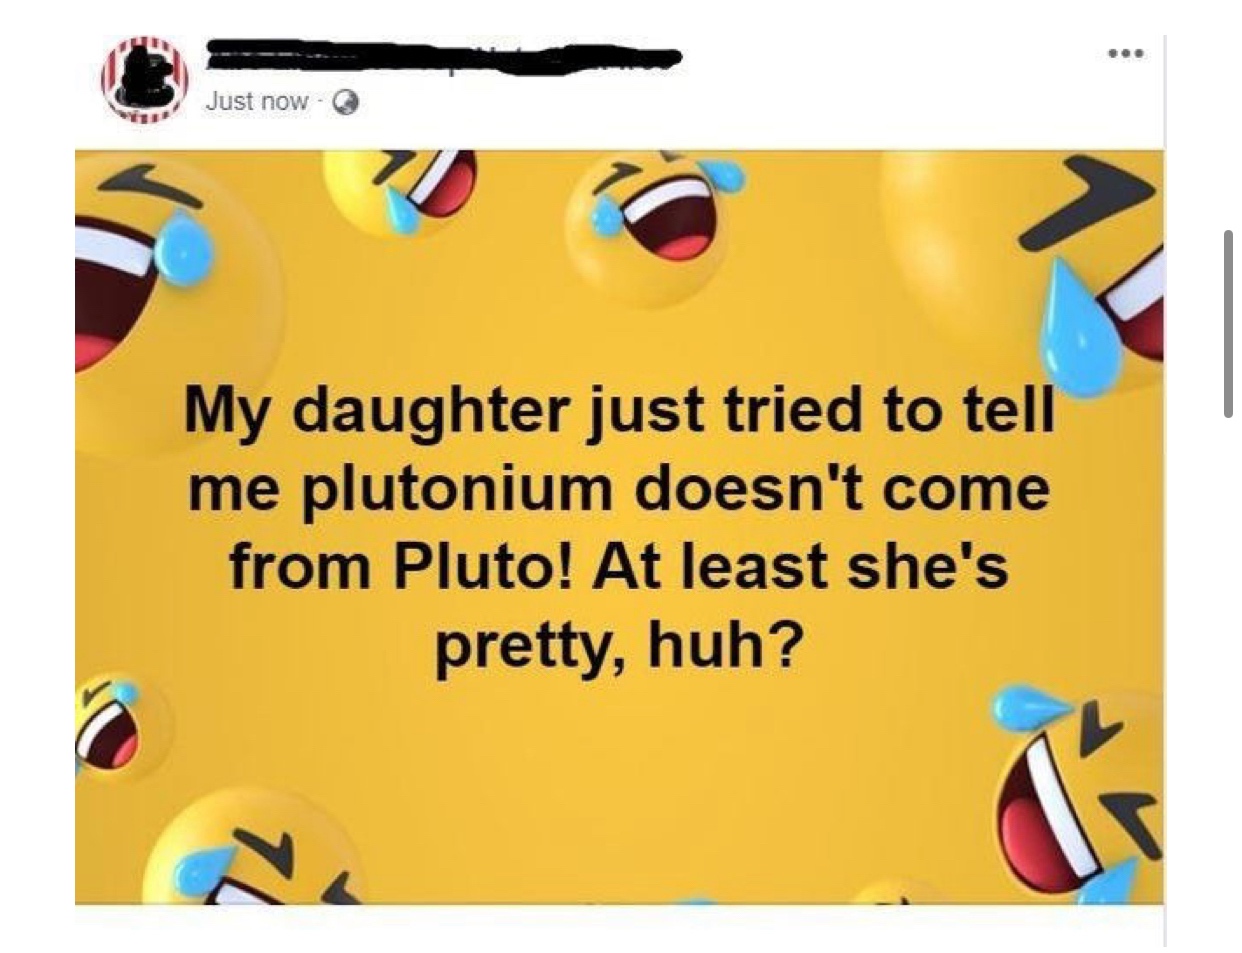 old people facebook memes - Just nowa My daughter just tried to tell me plutonium doesn't come from Pluto! At least she's pretty, huh?